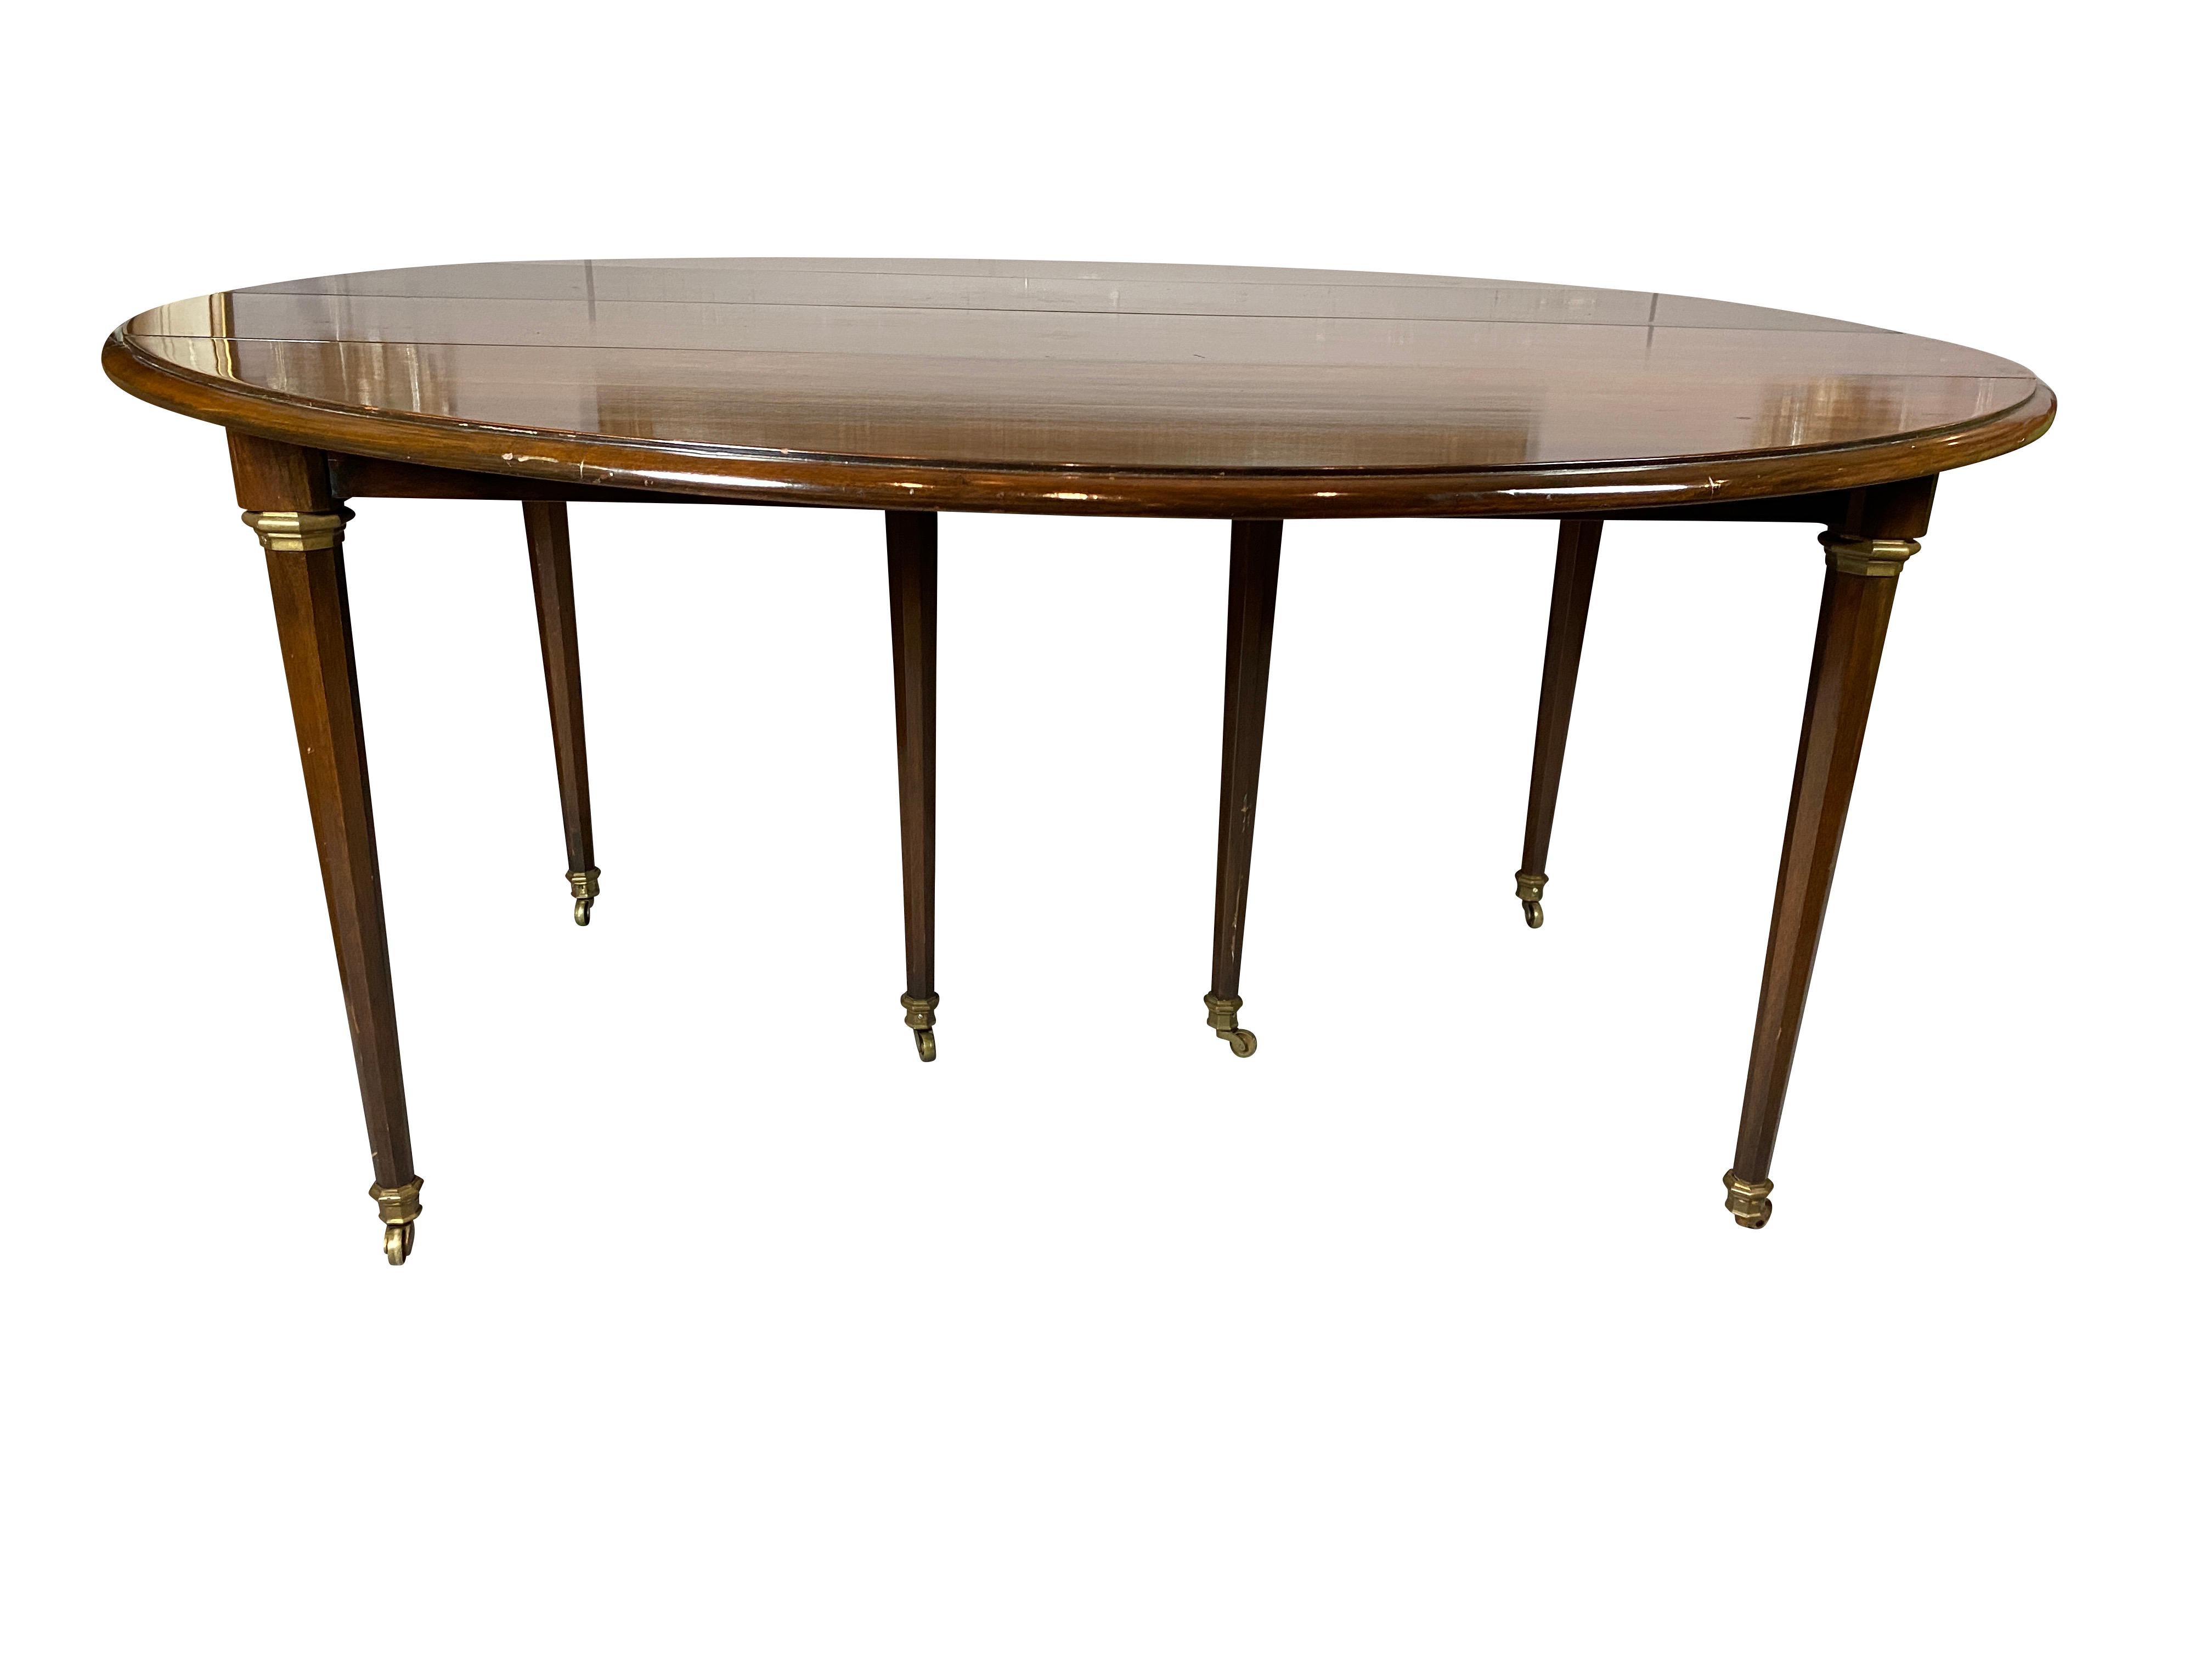 Probably by Jansen. With drop leaf ends , circular when closed with three leaves , brass cuffs on tops of legs. Leaves supported by telescoping mechanism circular tapered shaped legs ending on casters.